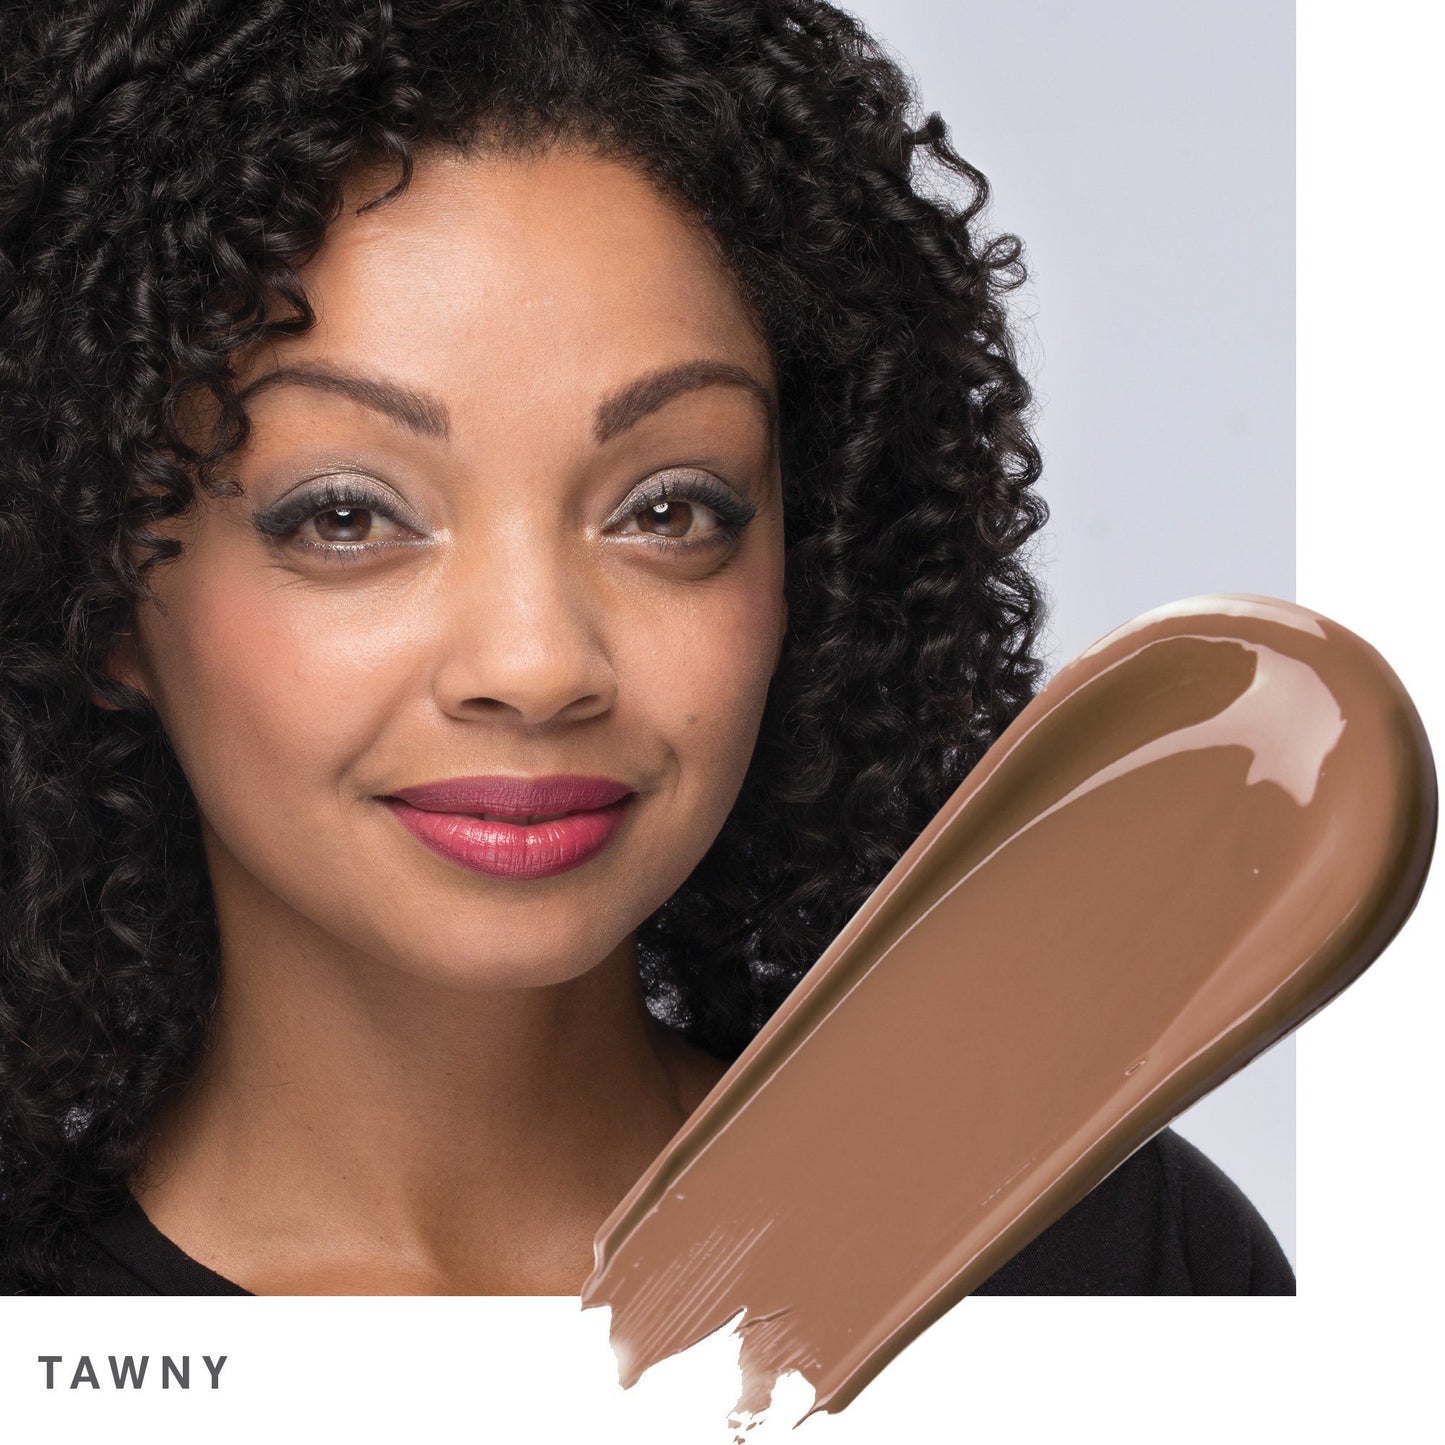 26 Tawny (for deep skin with pink undertones)